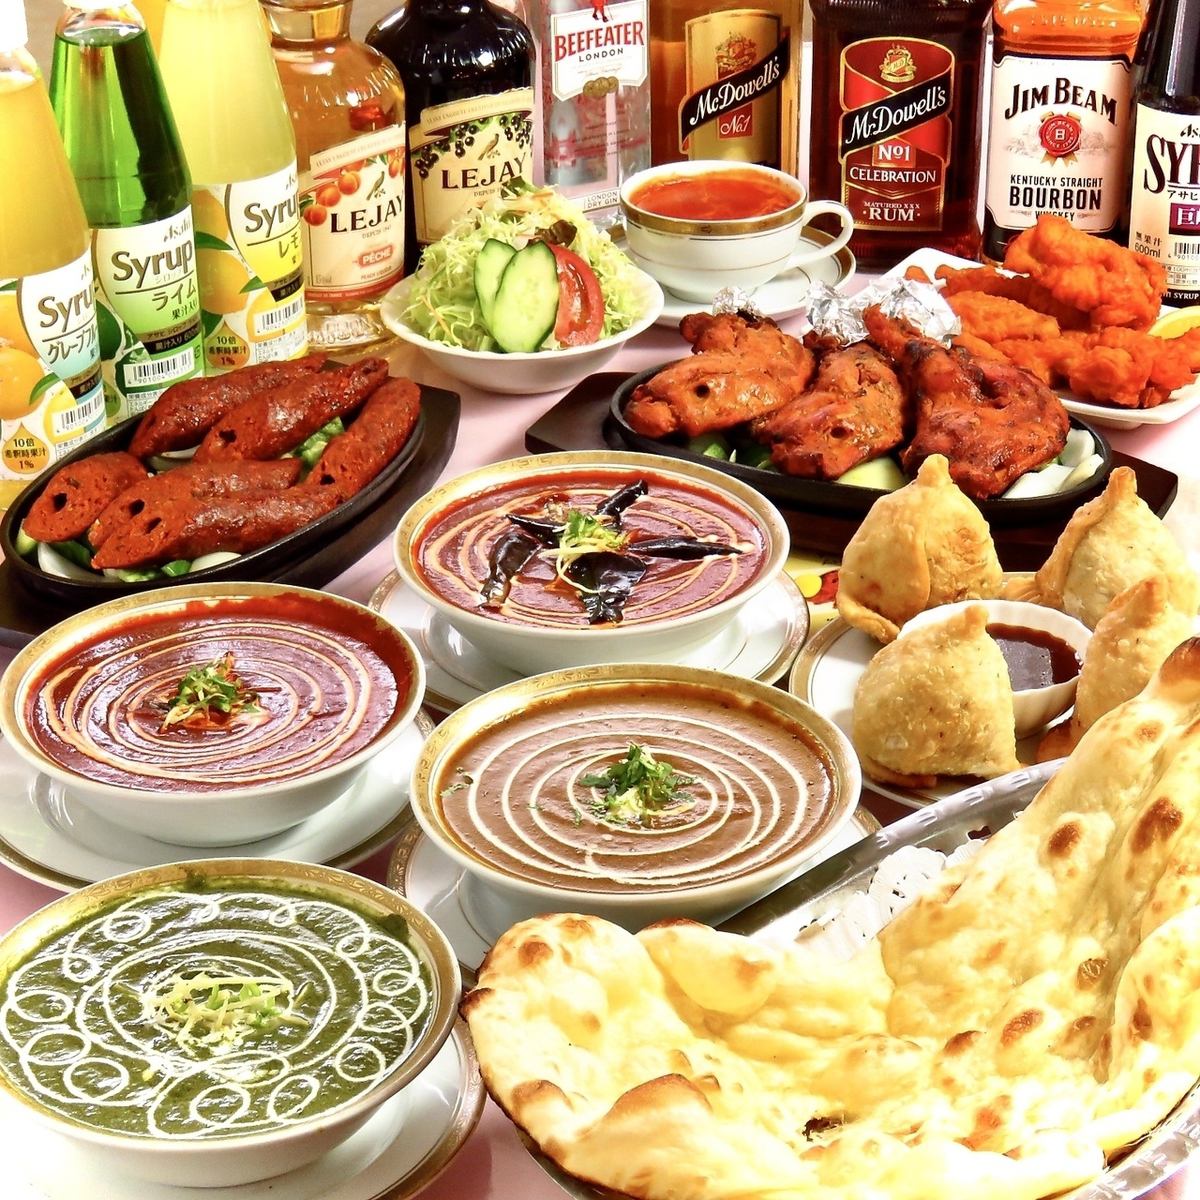 I came from authentic India! Long-established authentic Indian food ♪